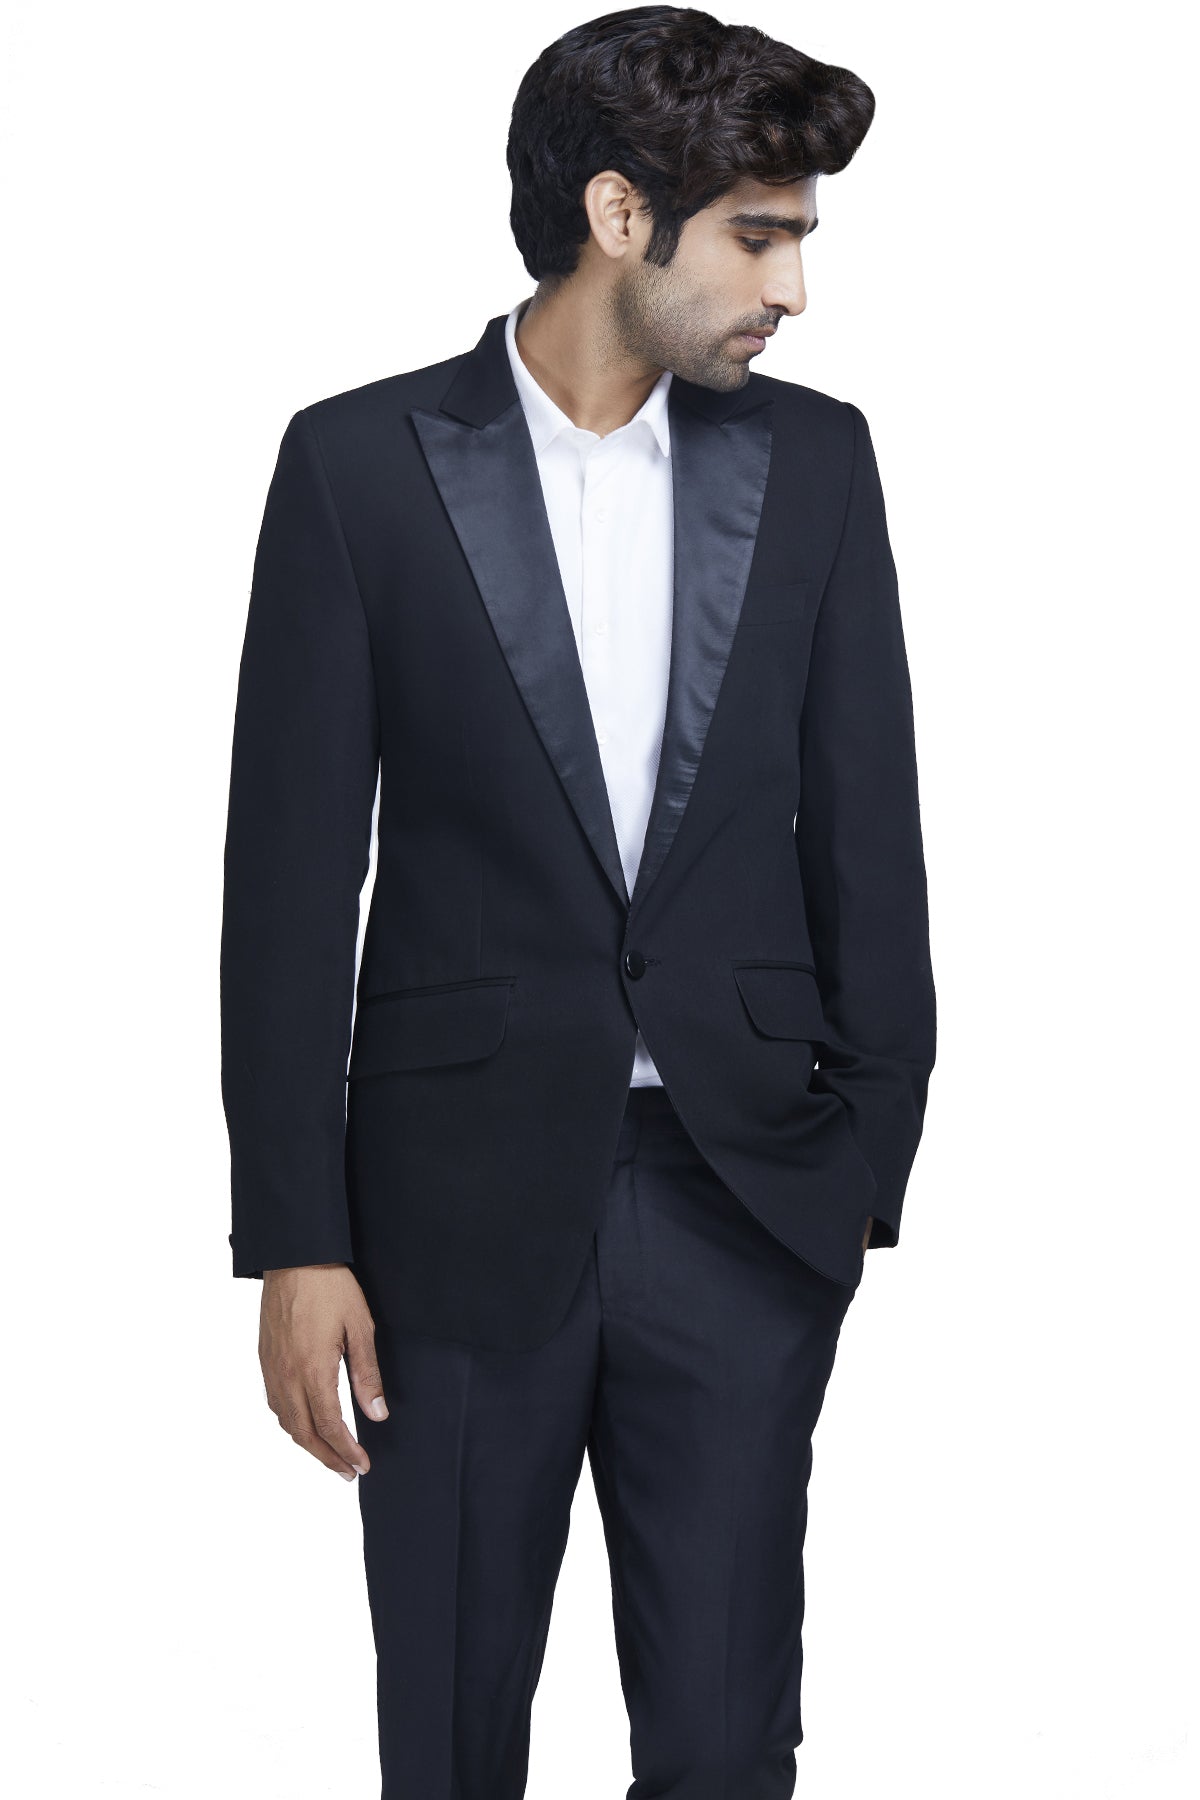 Black suit with pointed lapels